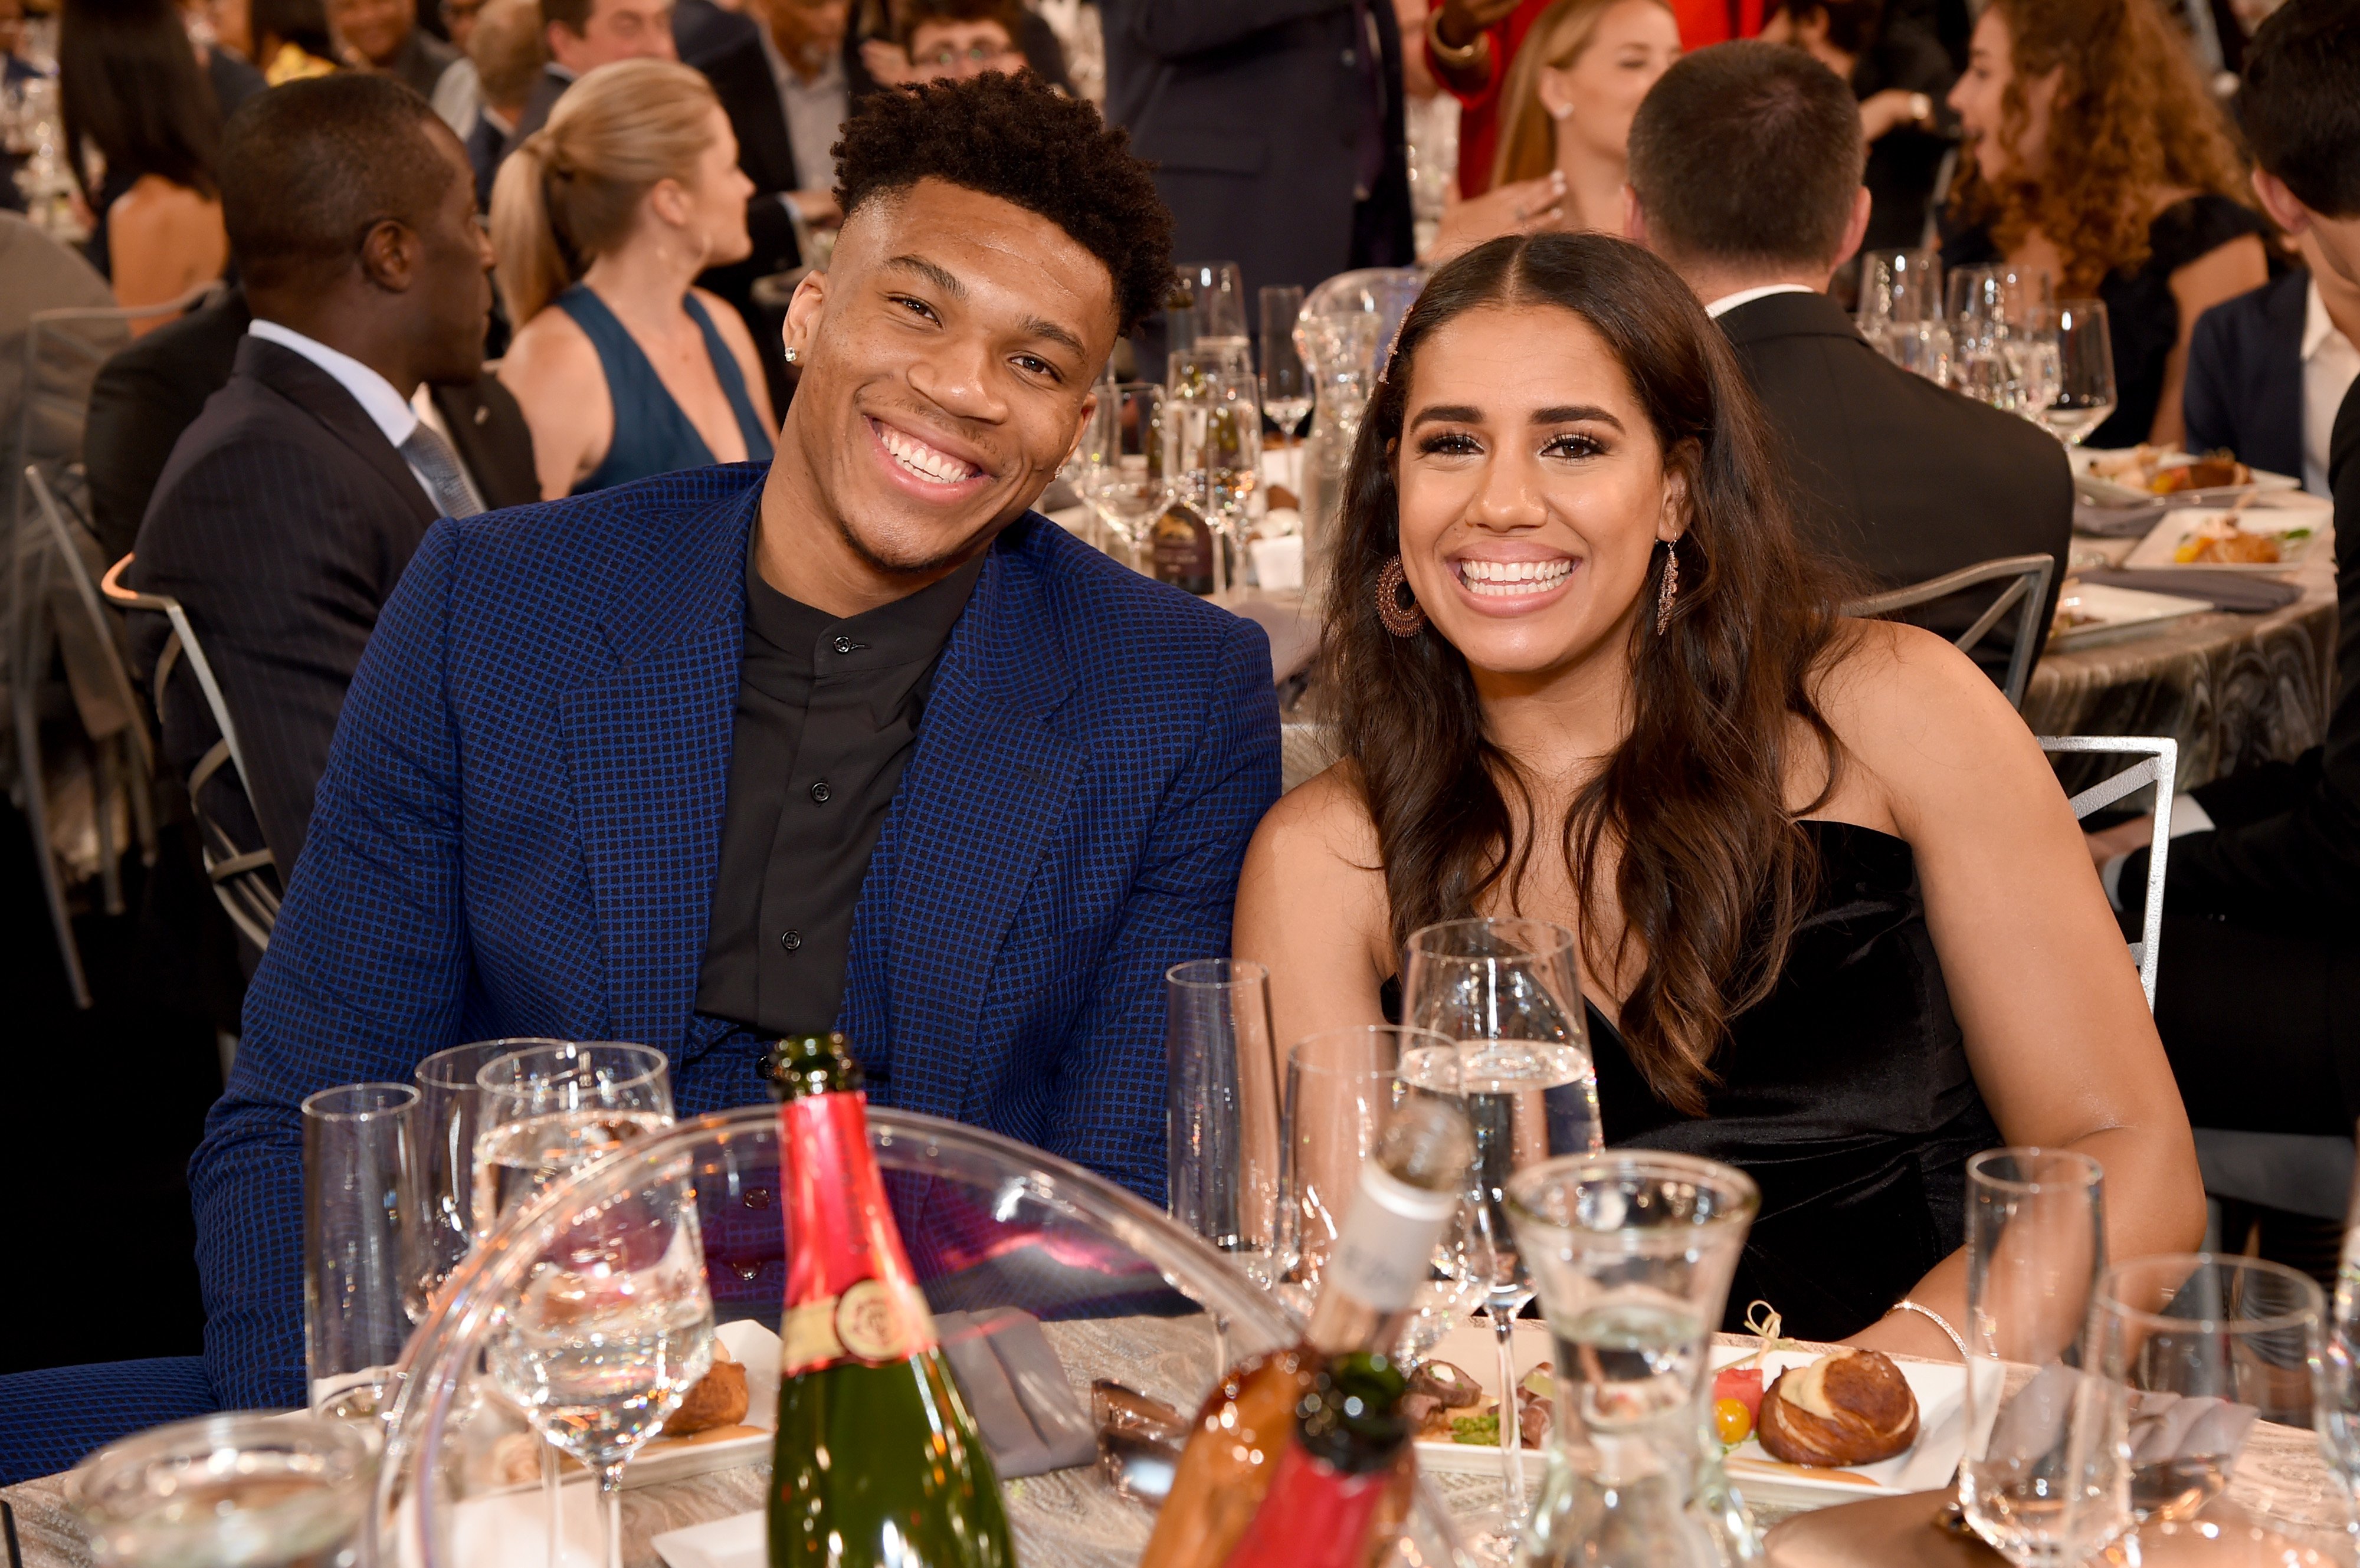 Giannis Antetokounmpo and Mariah Riddlesprigger sitting together and posing for a photo at the 2019 NBA Awards